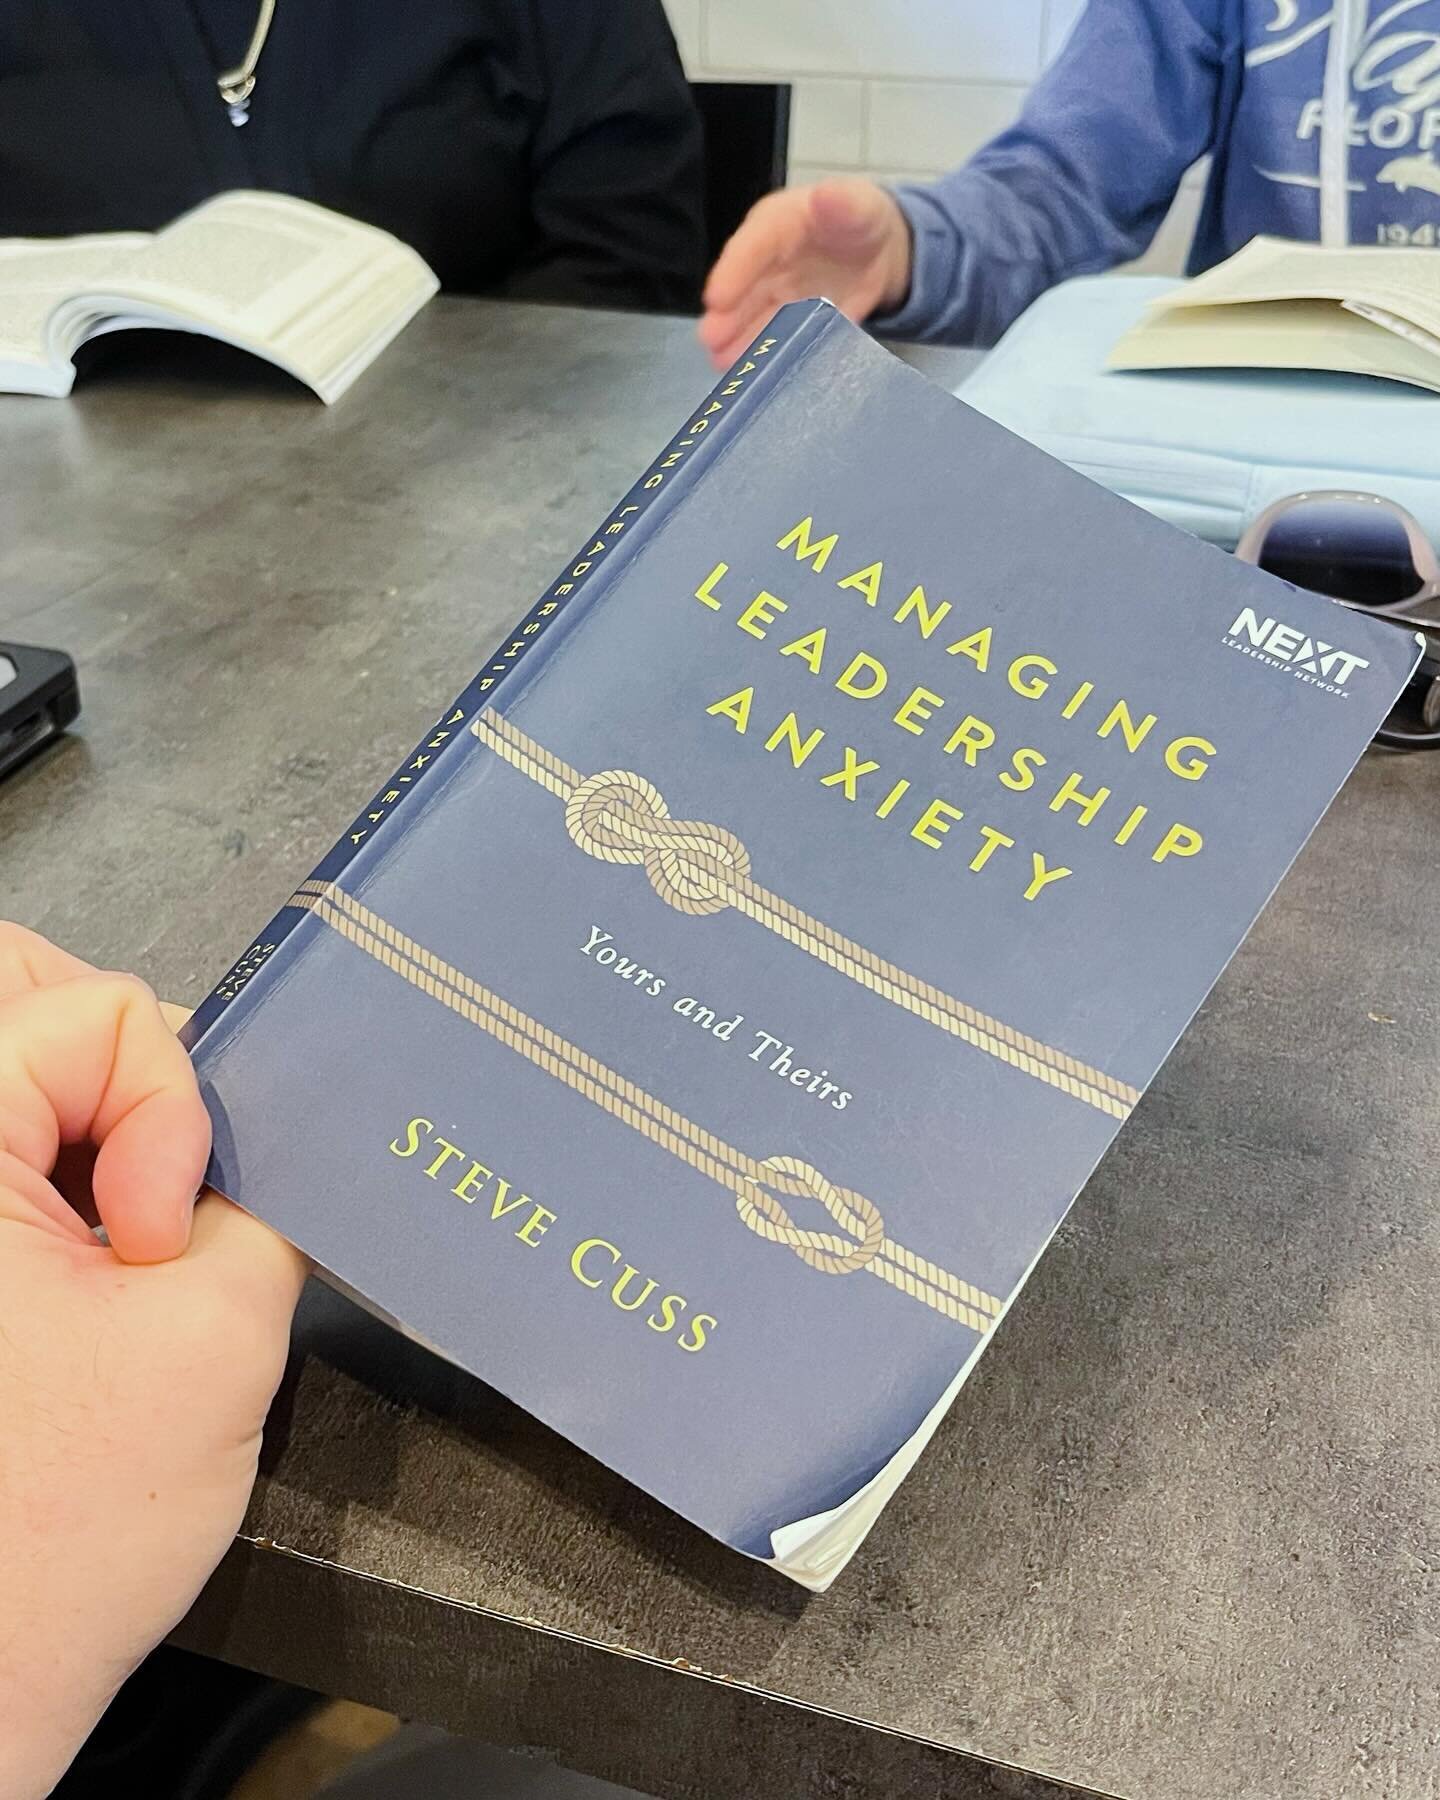 Staff book discussion.
.
.
#anxiety #book #discussion